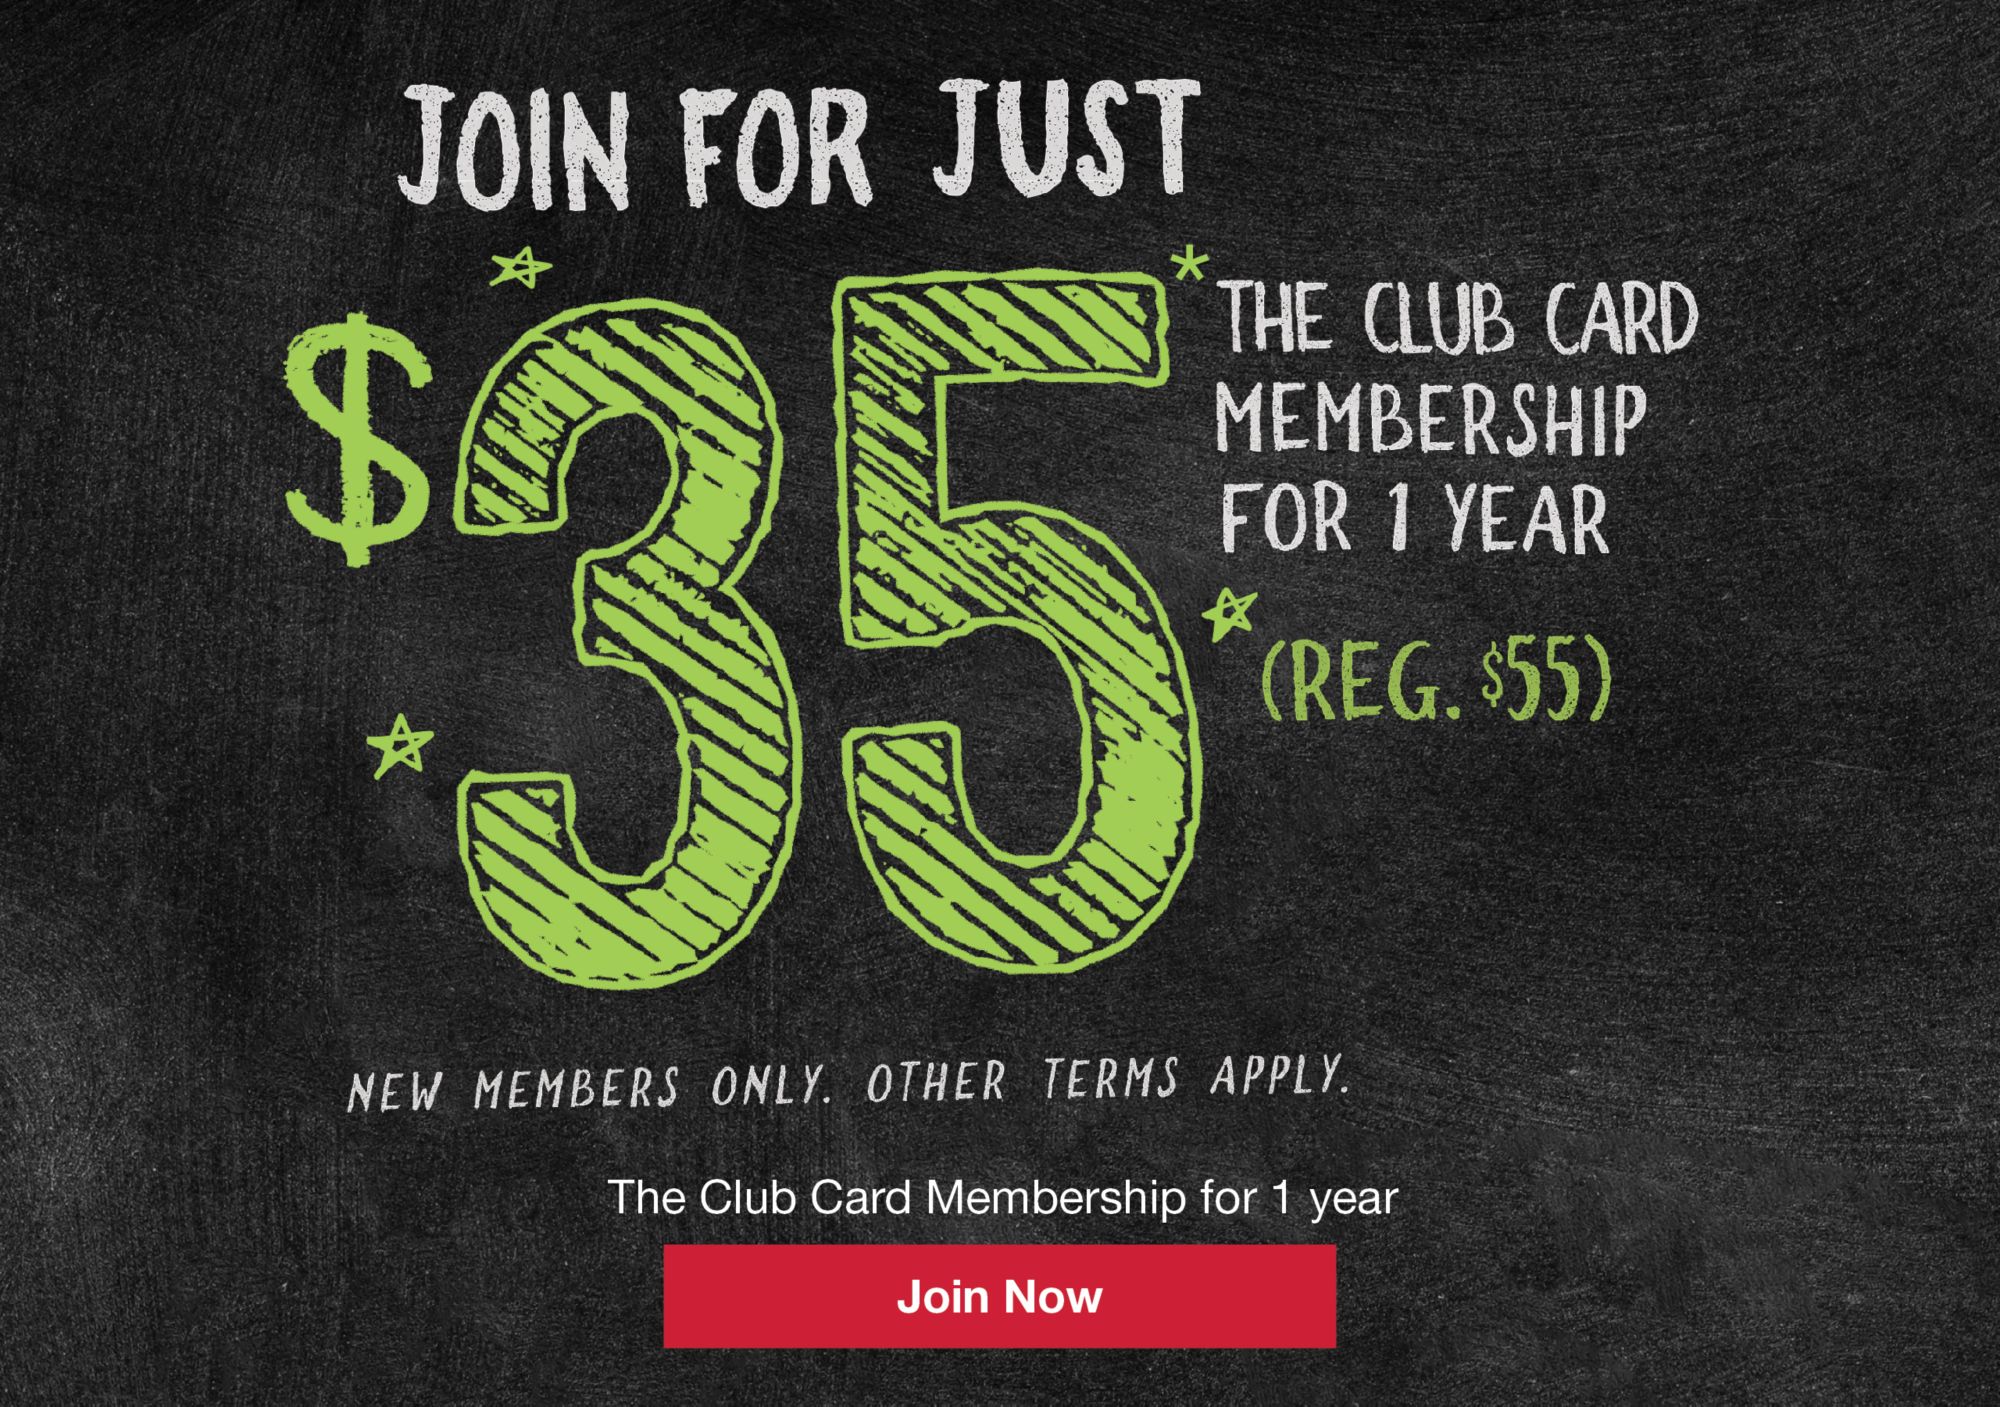 Join for $35. Get a 1-year the club card membership. Reg. $55. New membersonly. Other tems apply.